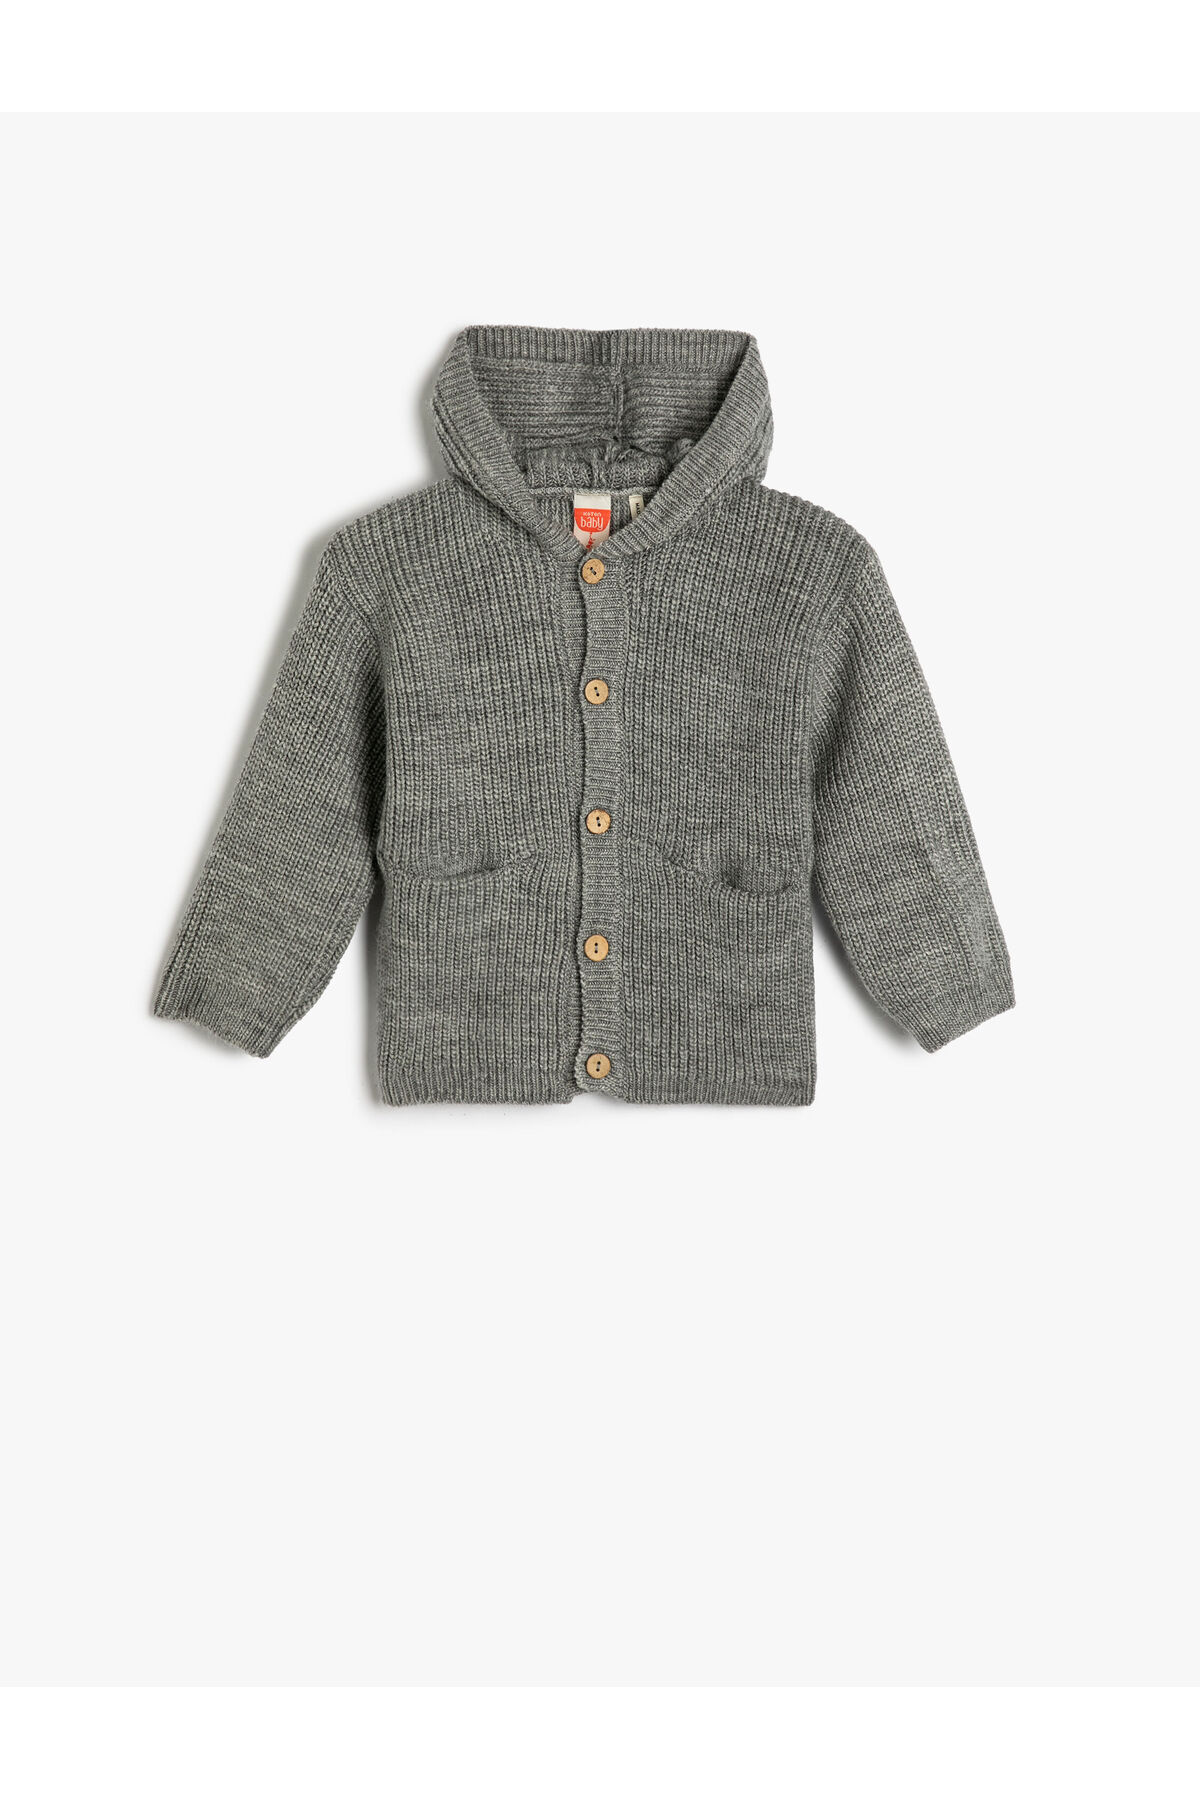 Koton Hooded Knitted Cardigan Button Closure with Pocket Detail